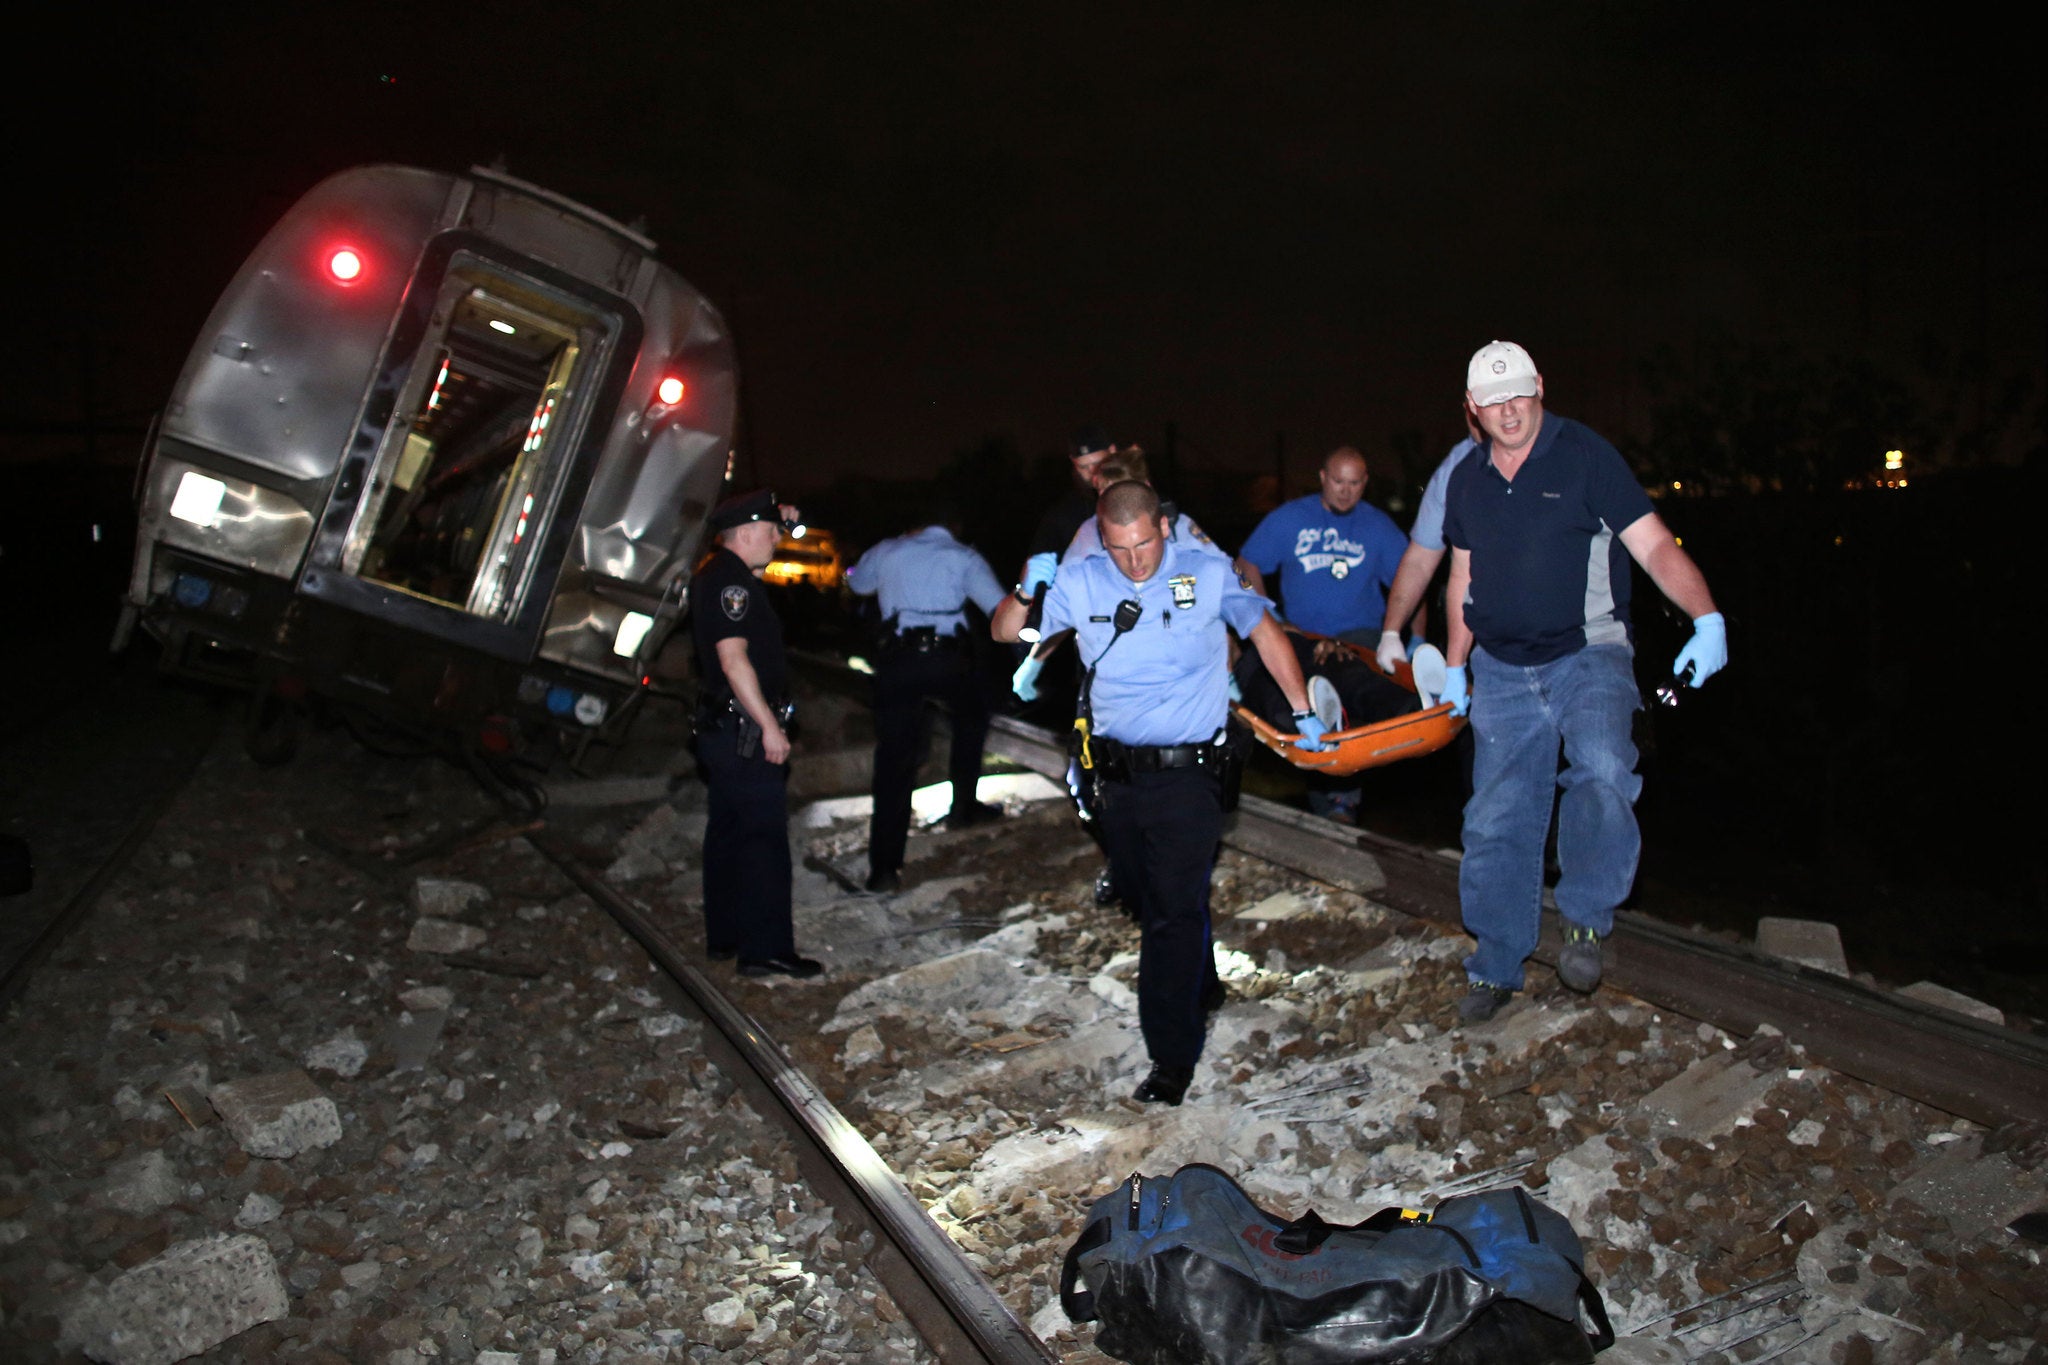 The train crashed after nightfall, impeding the rescue operation